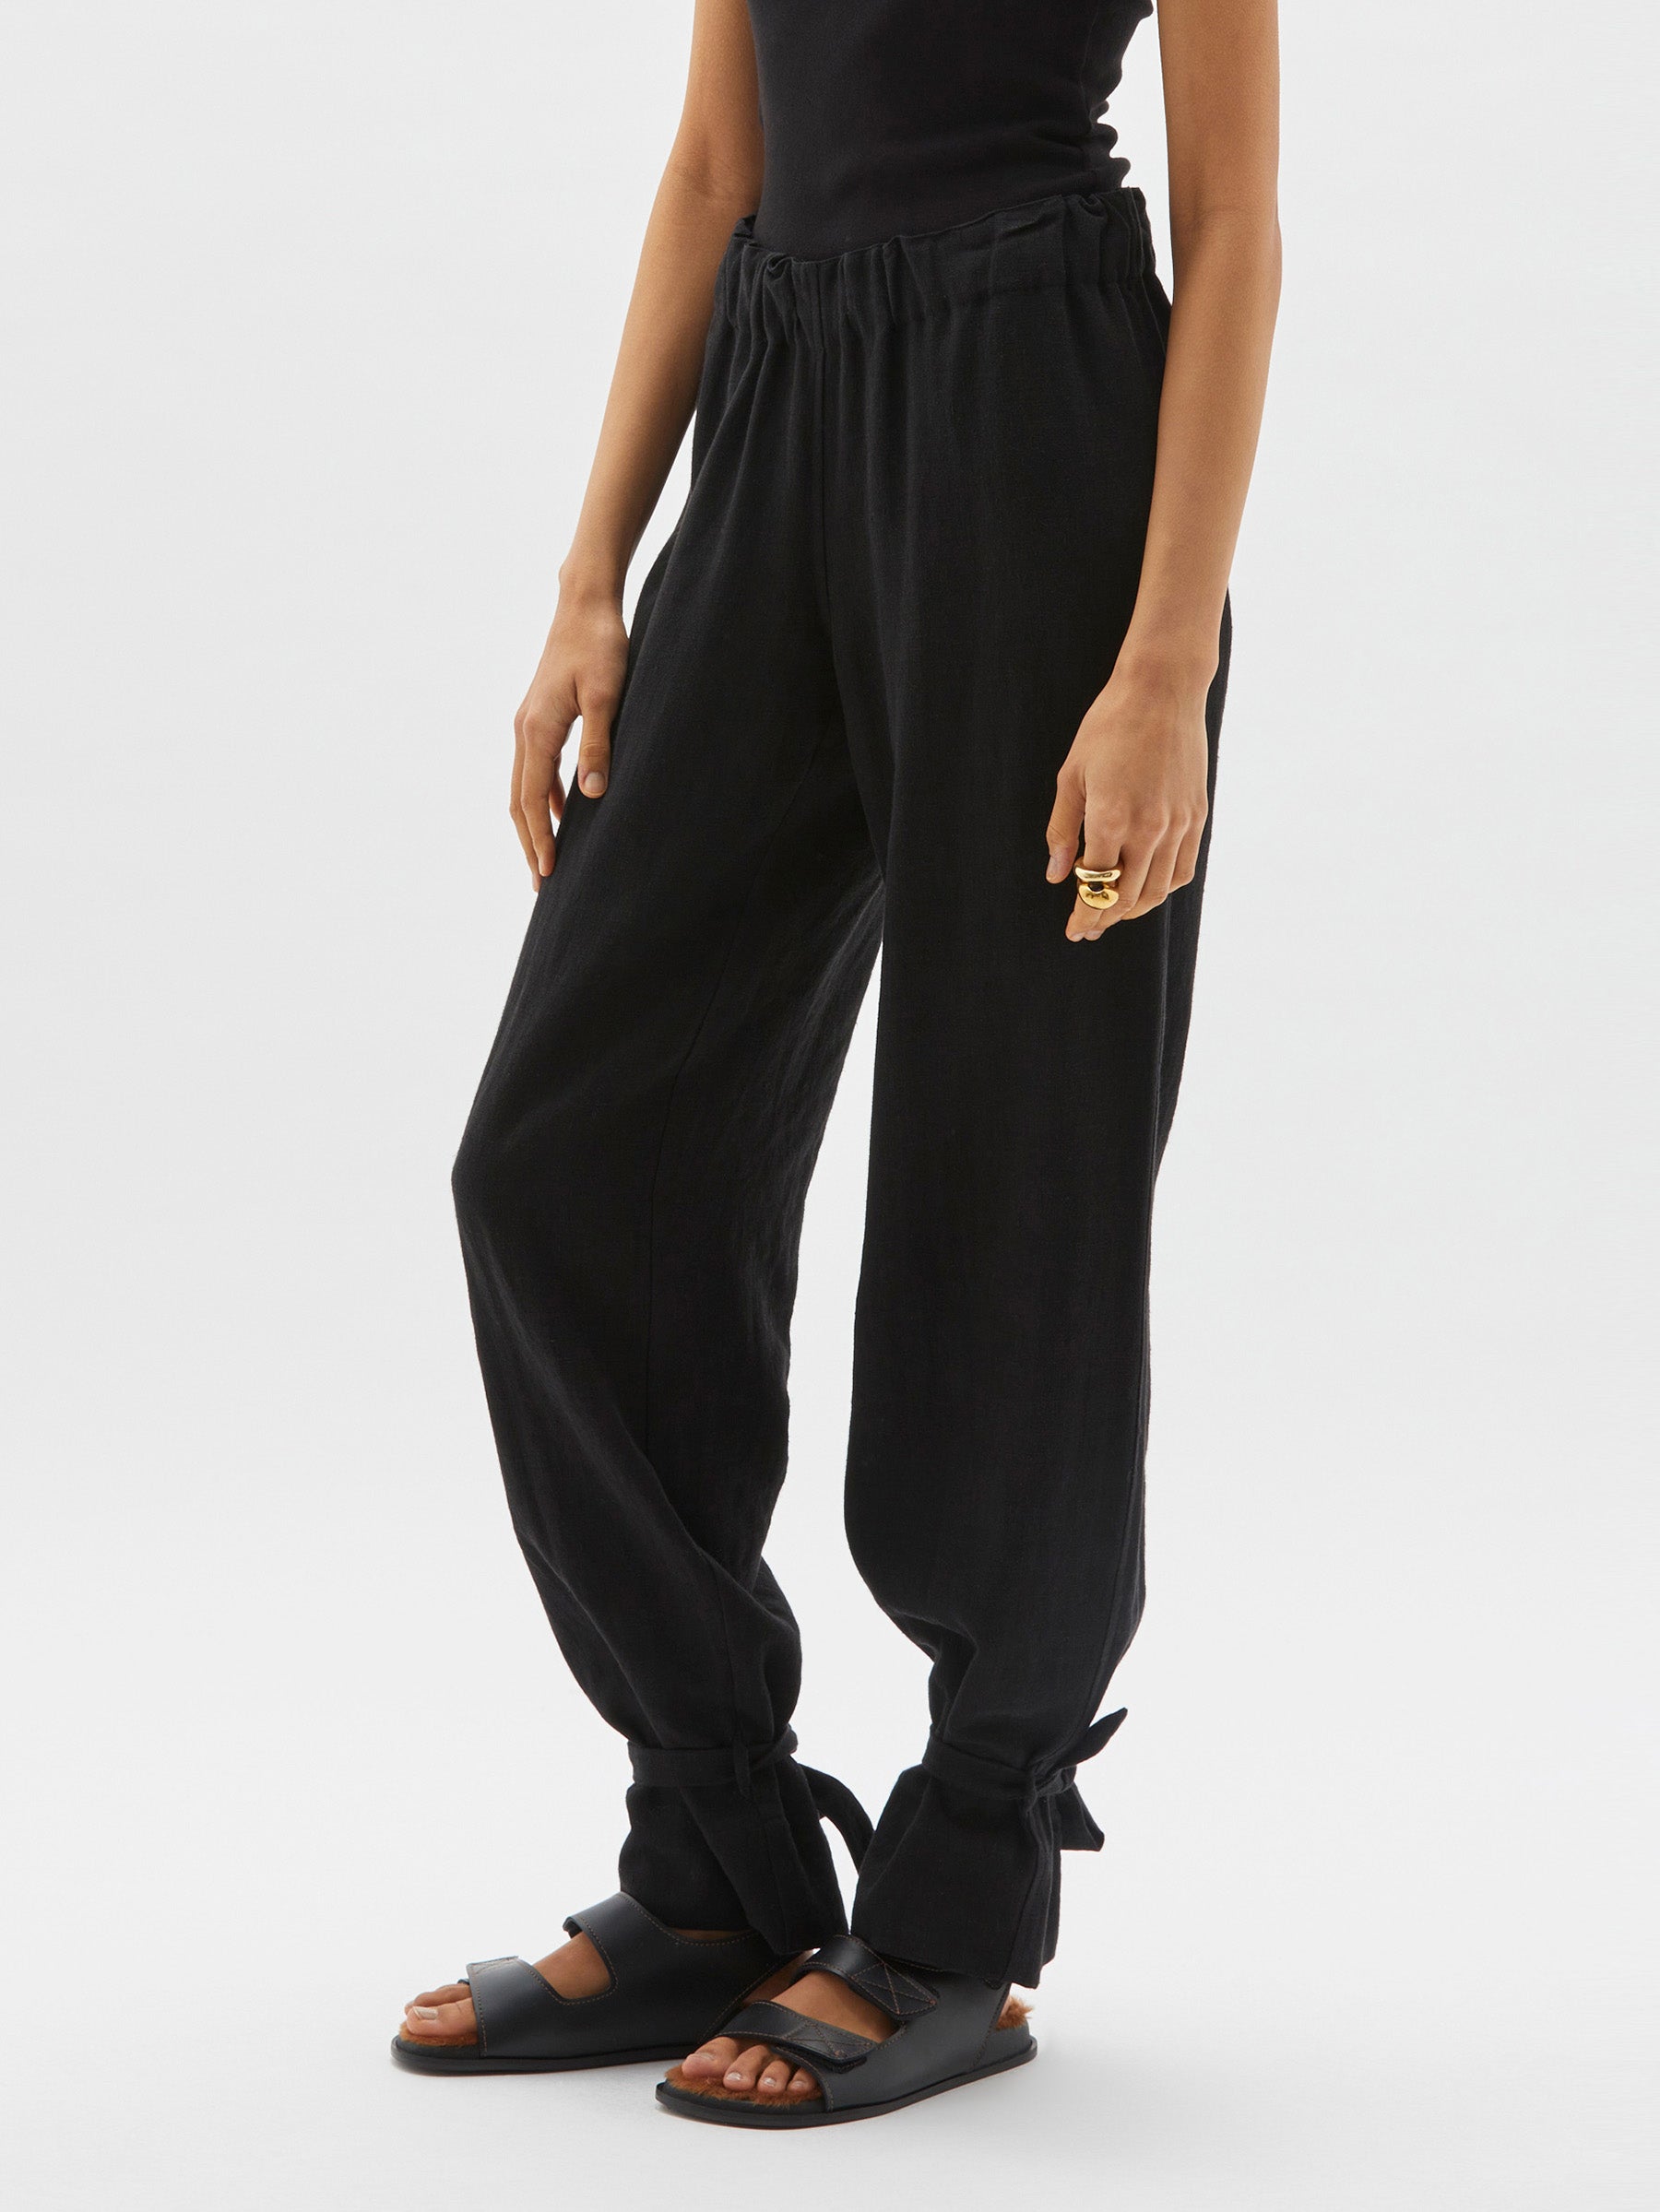 Classic Linen Wool Wrapped Pants - Black